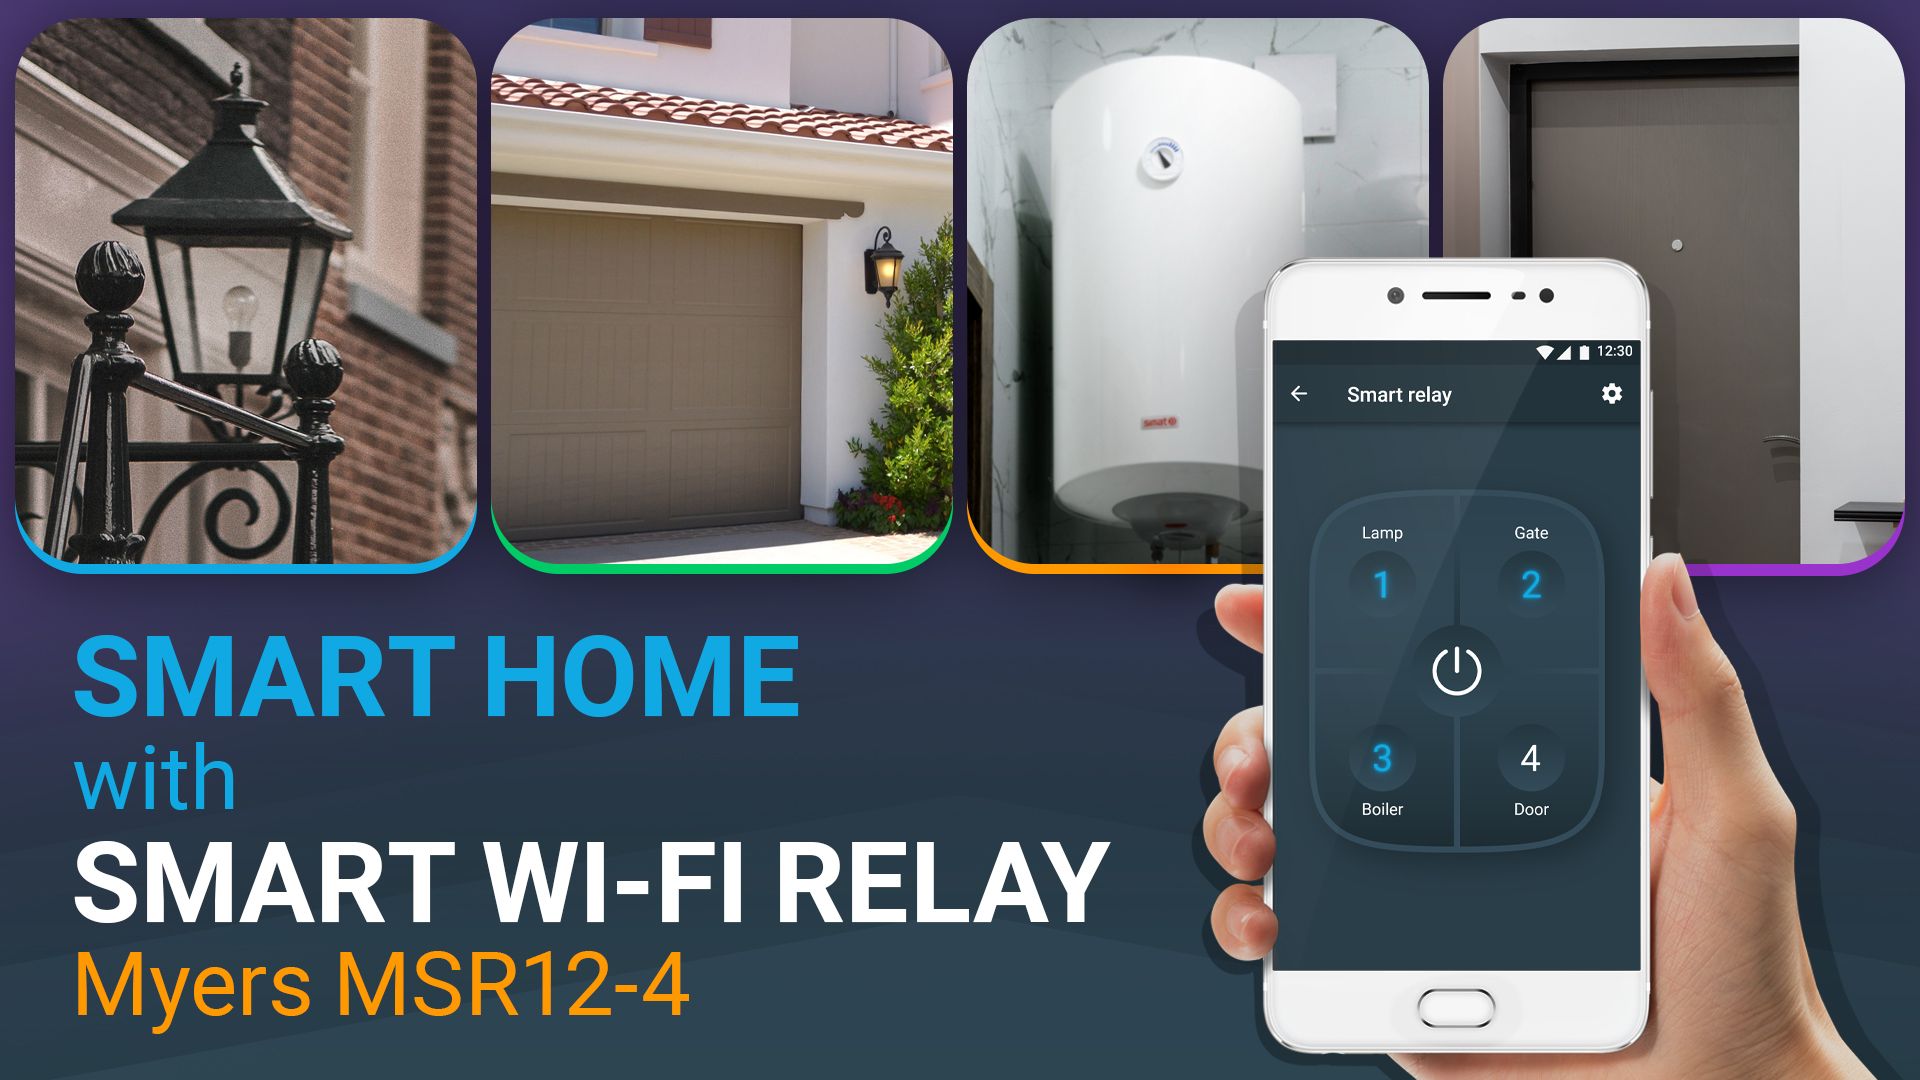 Smart home with smart Wi-Fi relay Myers MSR12-4